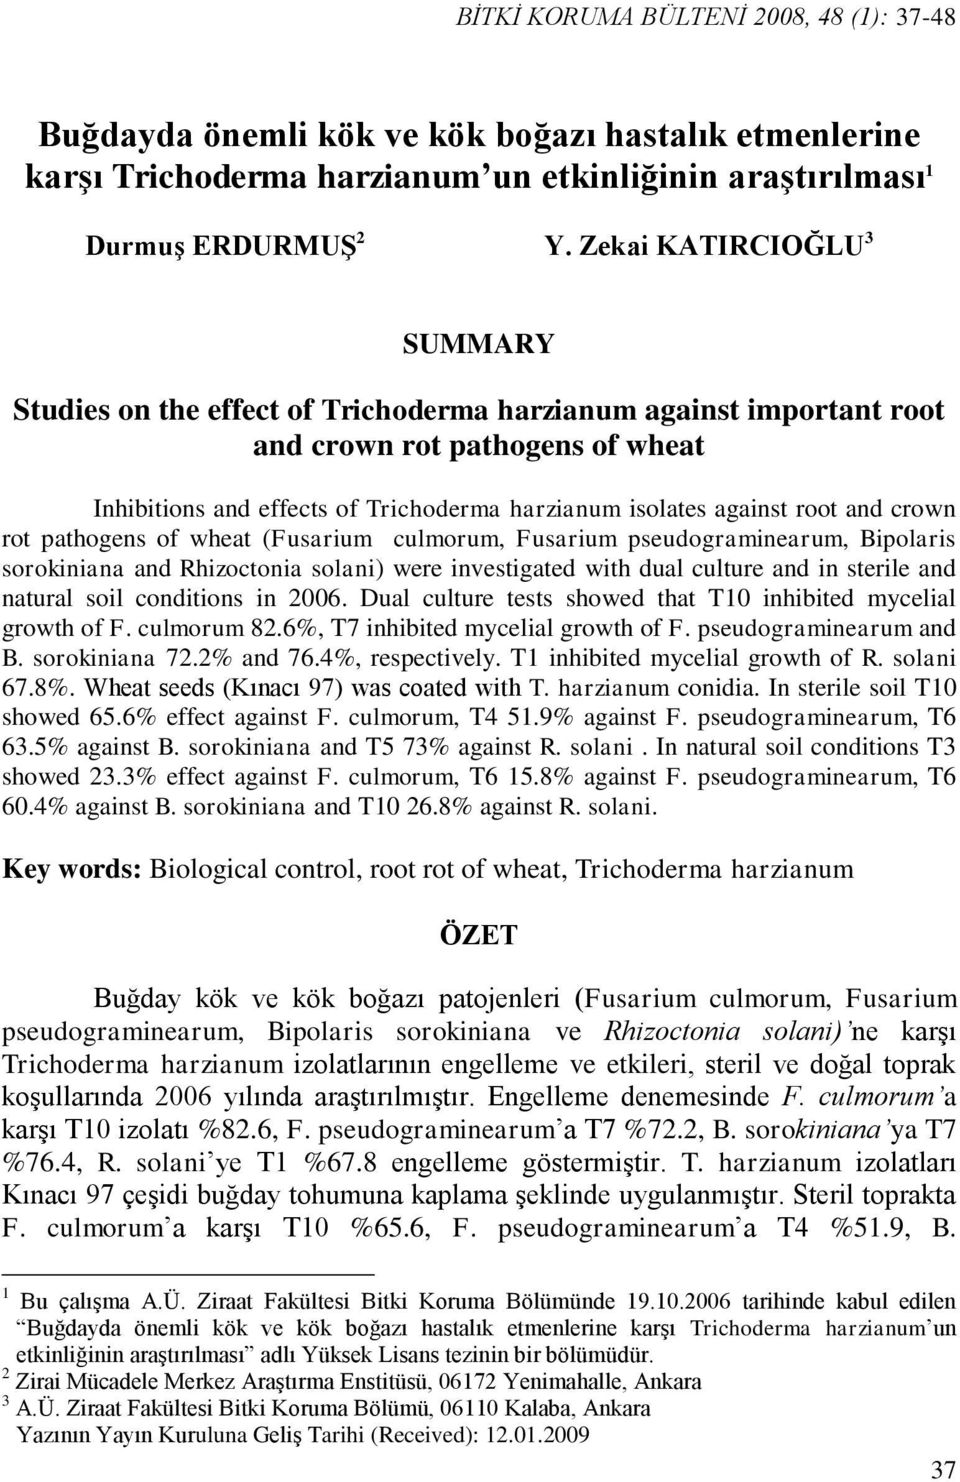 root and crown rot pathogens of wheat (Fusarium culmorum, Fusarium pseudograminearum, Bipolaris sorokiniana and Rhizoctonia solani) were investigated with dual culture and in sterile and natural soil